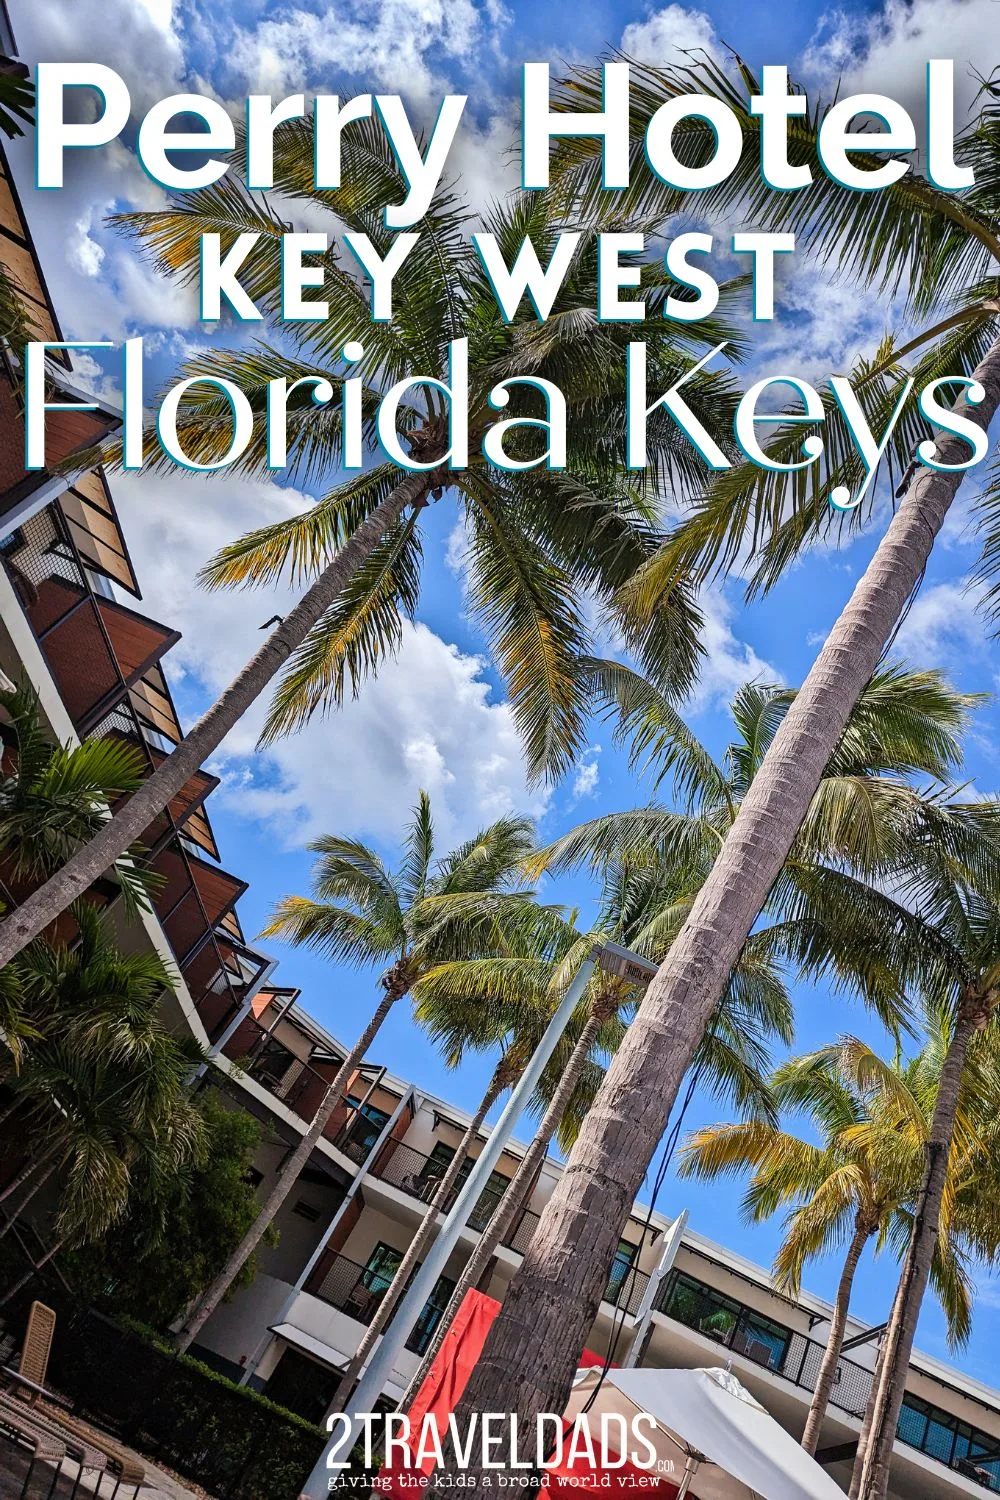 The Perry Hotel Key West is a bit off the beaten path, but it's a great option for a quiet Key West vacation. See what we loved about the property and why we would choose to be so far from the action of this beautiful Florida Keys town.